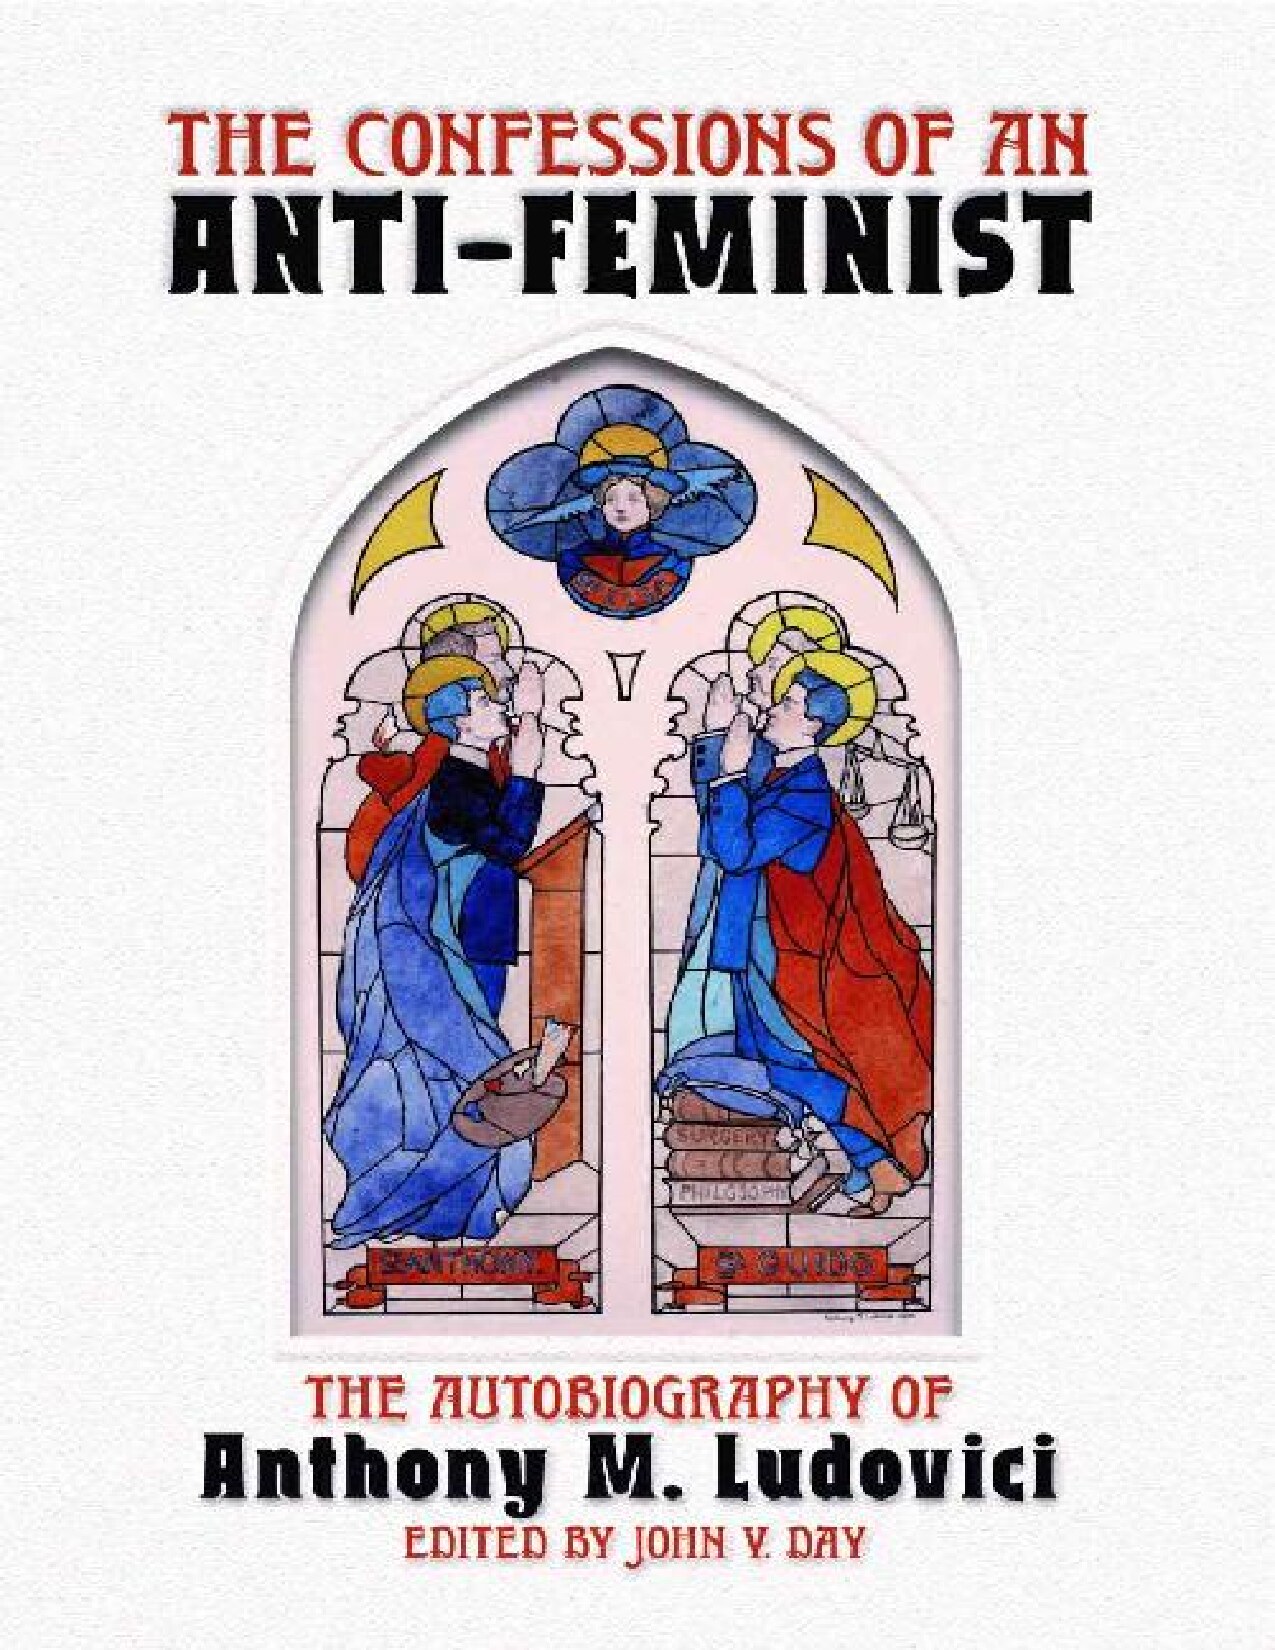 Confessions of an Anti-Feminist: The Autobiography of Anthony M. Ludovici